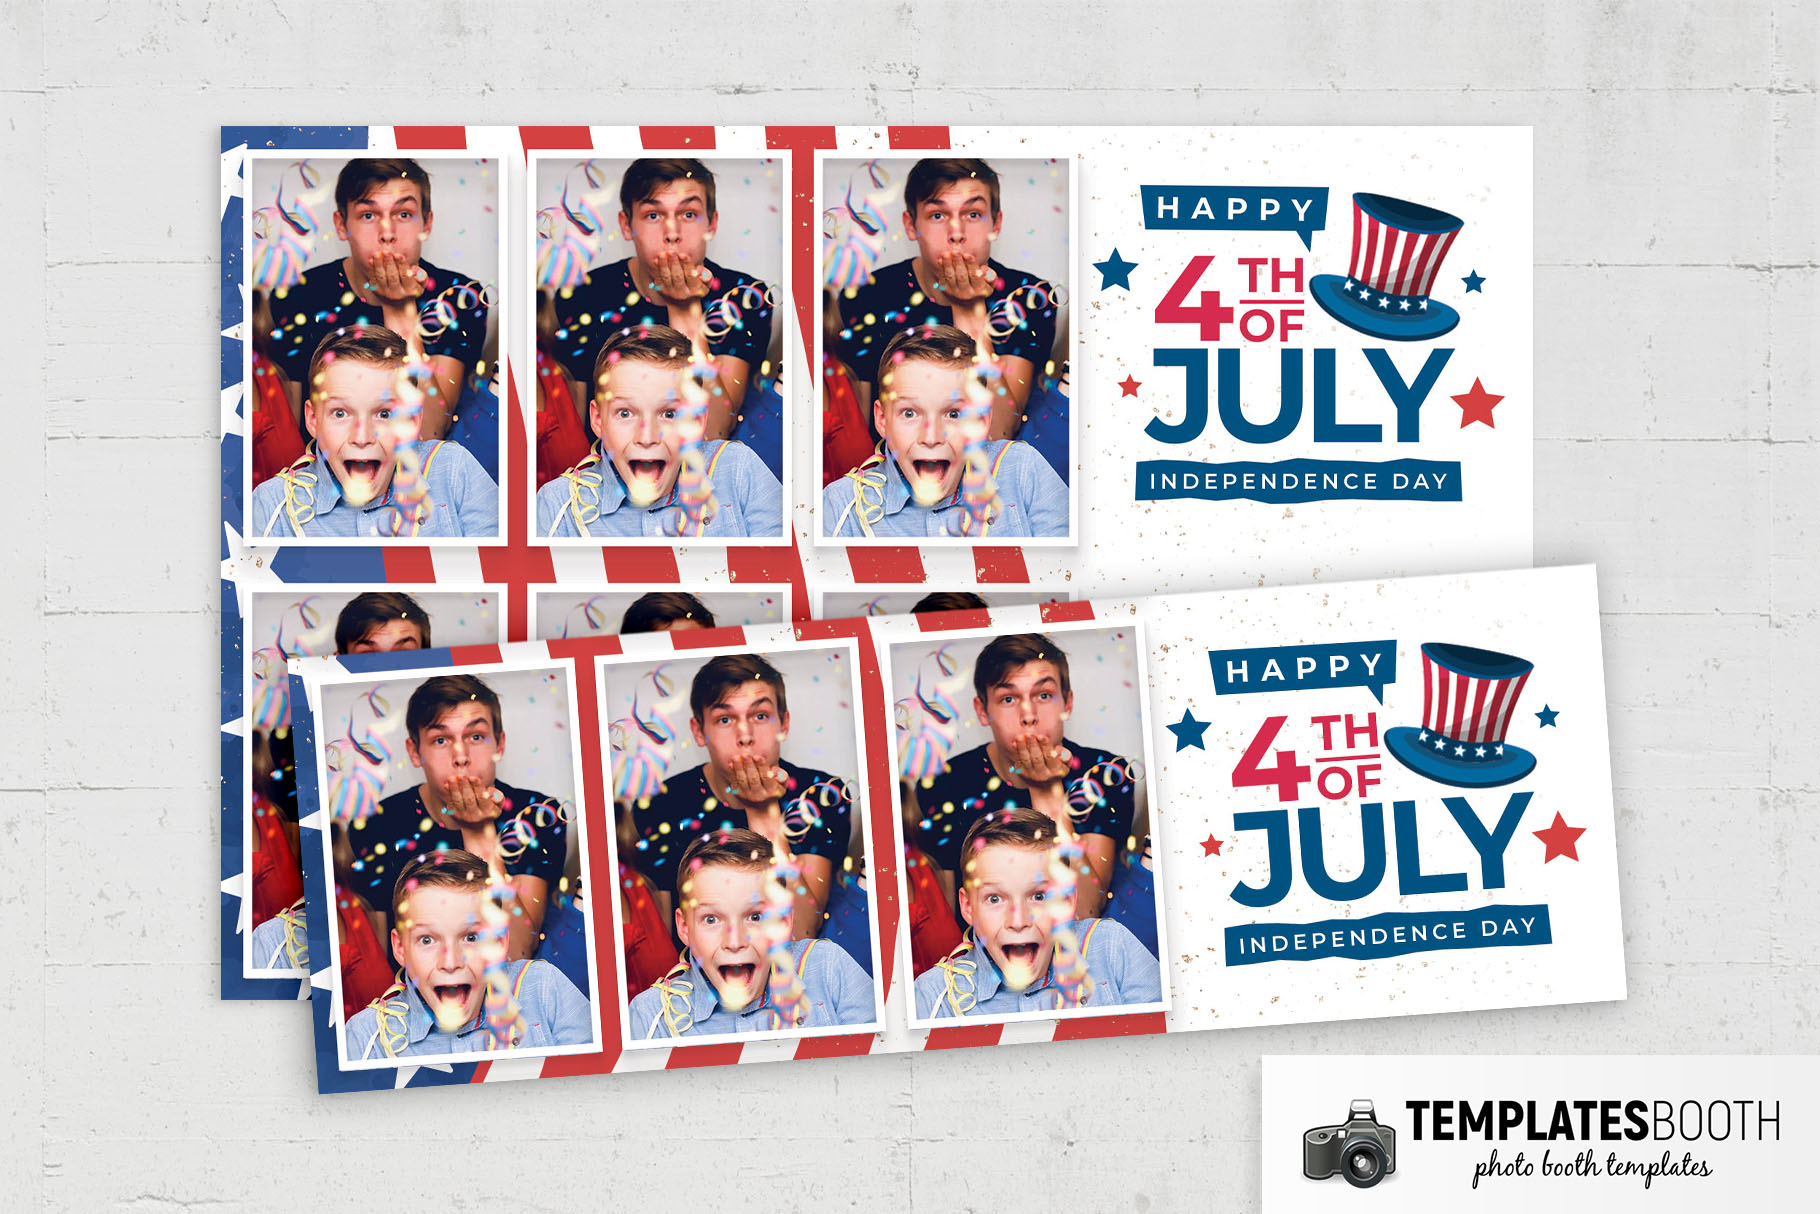 4th July Photo Booth Template